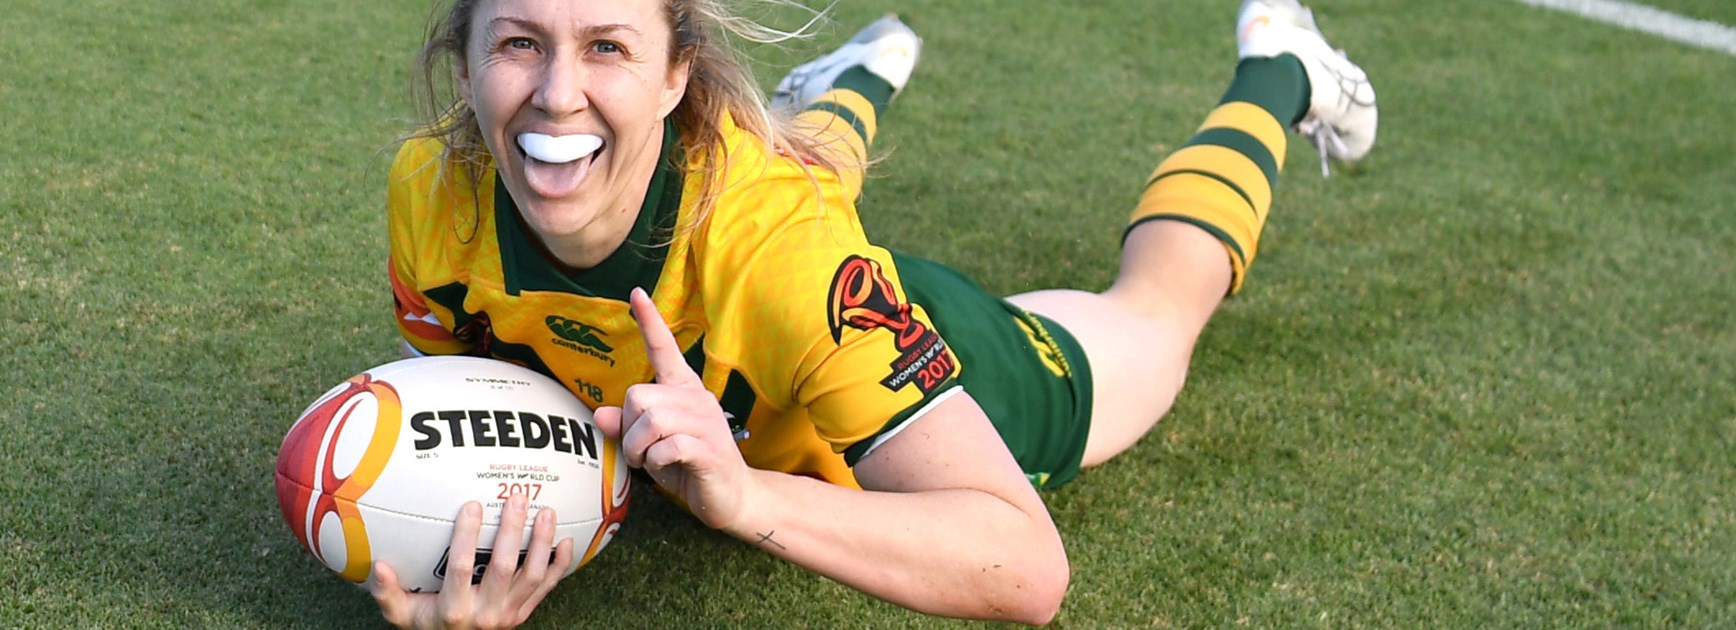 Geographic location the focus as NRL women's teams announced